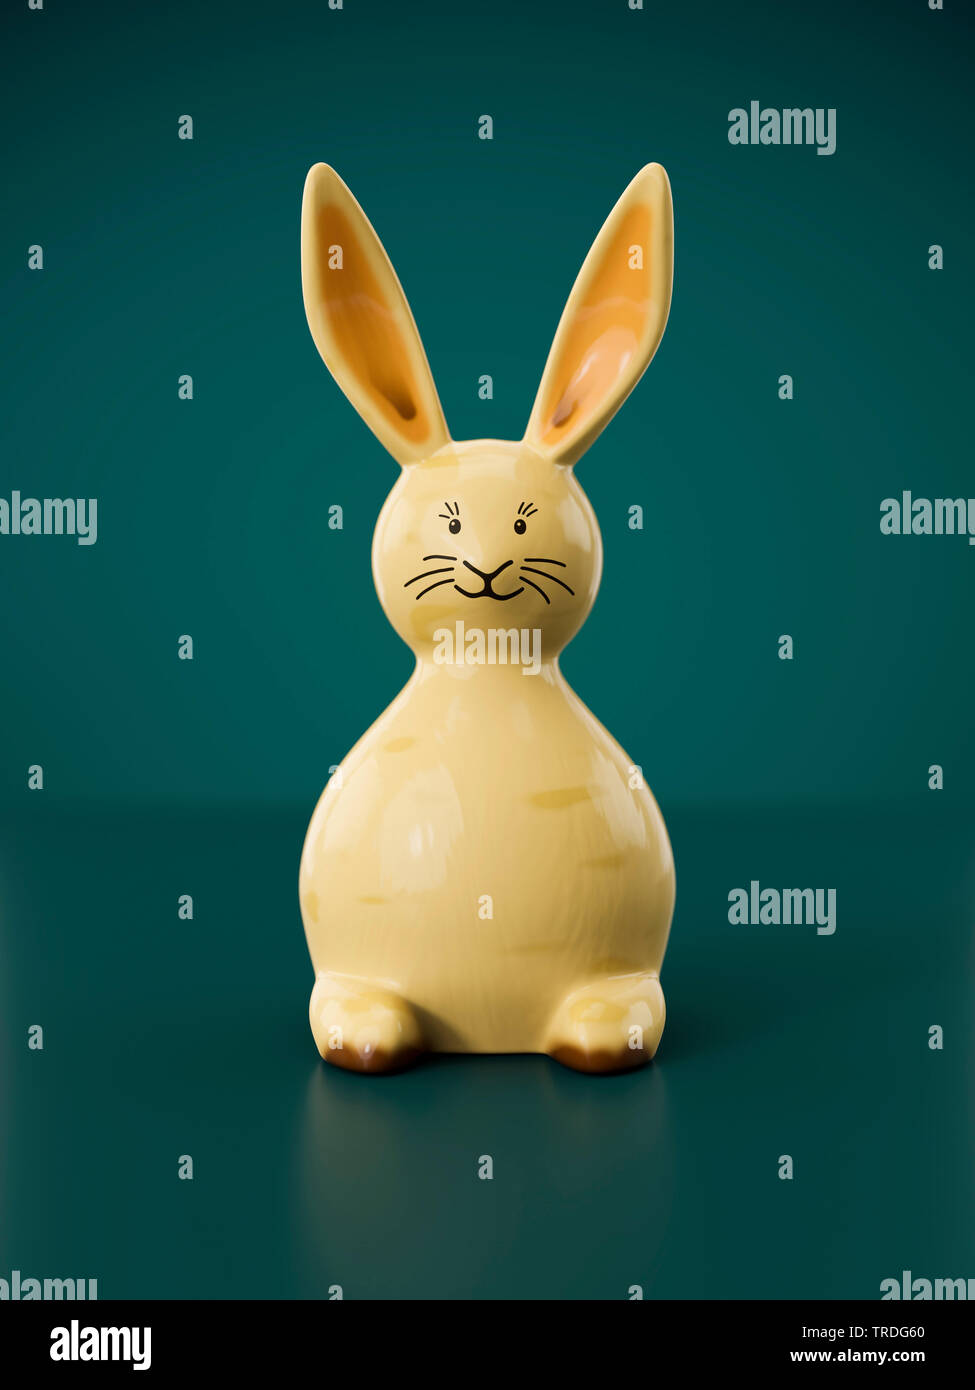 Ester card - Three-dimensional Easter Bunny in beige color against green background Stock Photo